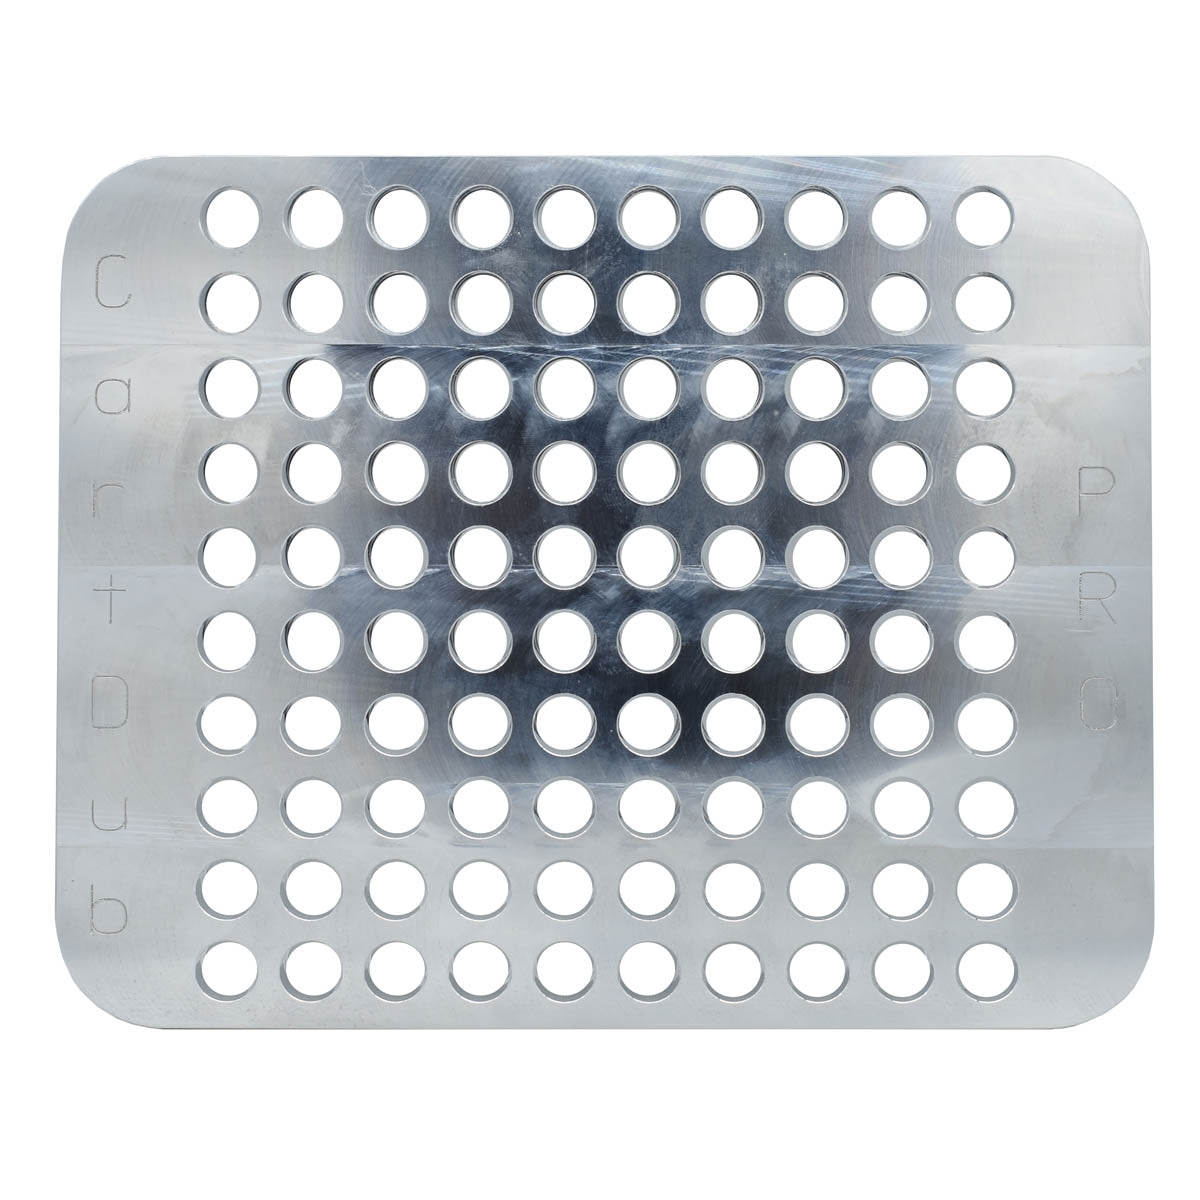 CartDub Pro Oil Removal Aluminum Plate for 100 Carts (part of the kit)